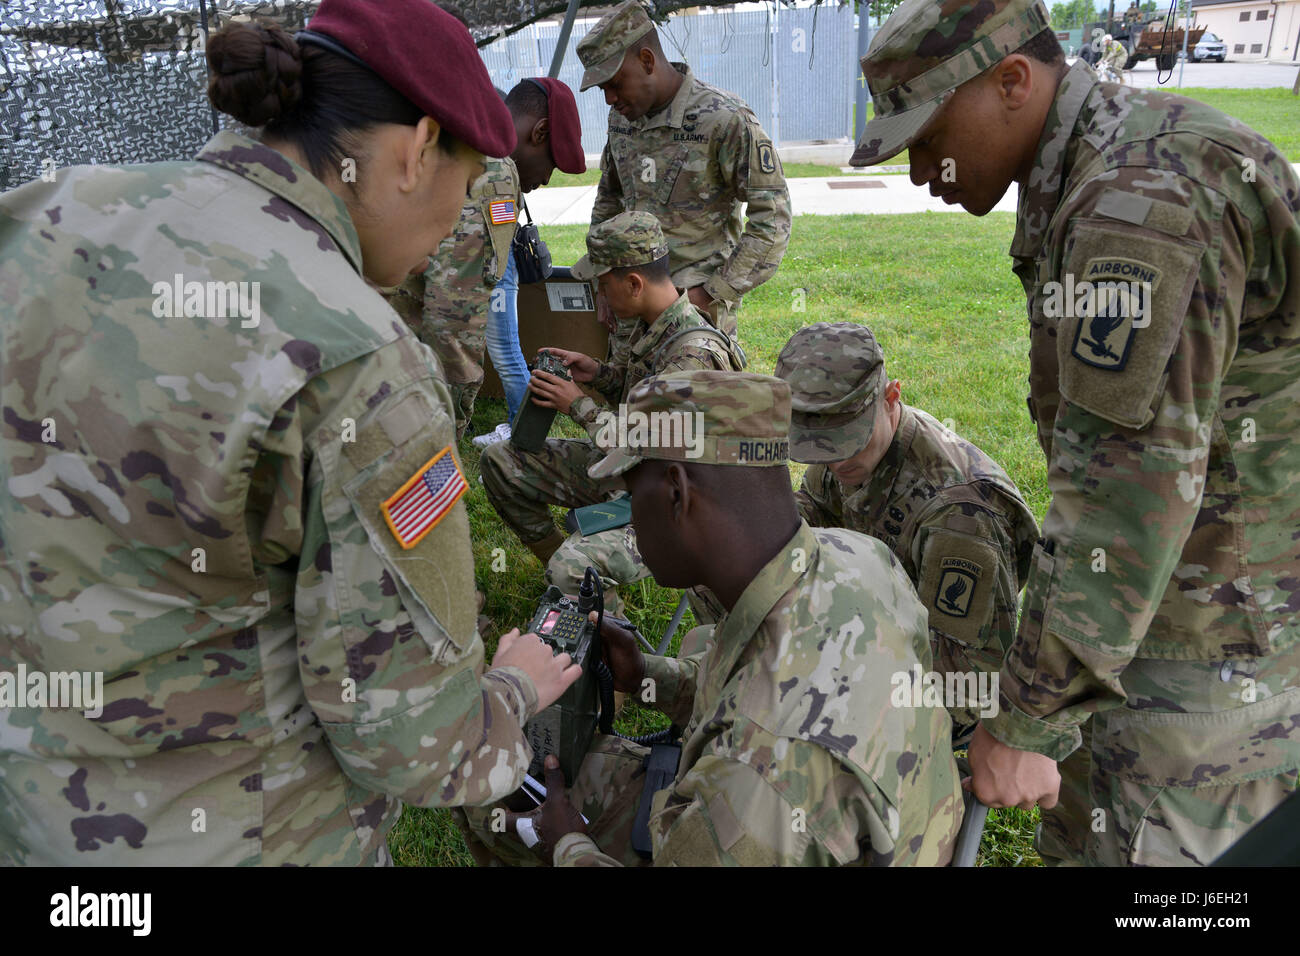 U.S. Army Paratroopers assigned to the 173rd Airborne Brigade Support Battalion, 173rd Airborne Brigade, participate in a radio challenge during the Junior Leader Challenge at Caserma Del Din, Vicenza, Italy May 10, 2017.  The 173rd Airborne Brigade is the U.S. Army Contingency Response Force in Europe, capable of projecting ready forces anywhere in the U.S. European, Africa or Central Commands areas of responsibility within 18 hours.  (U.S. Army photo by Visual Information Specialist Antonio Bedin/released) Stock Photo